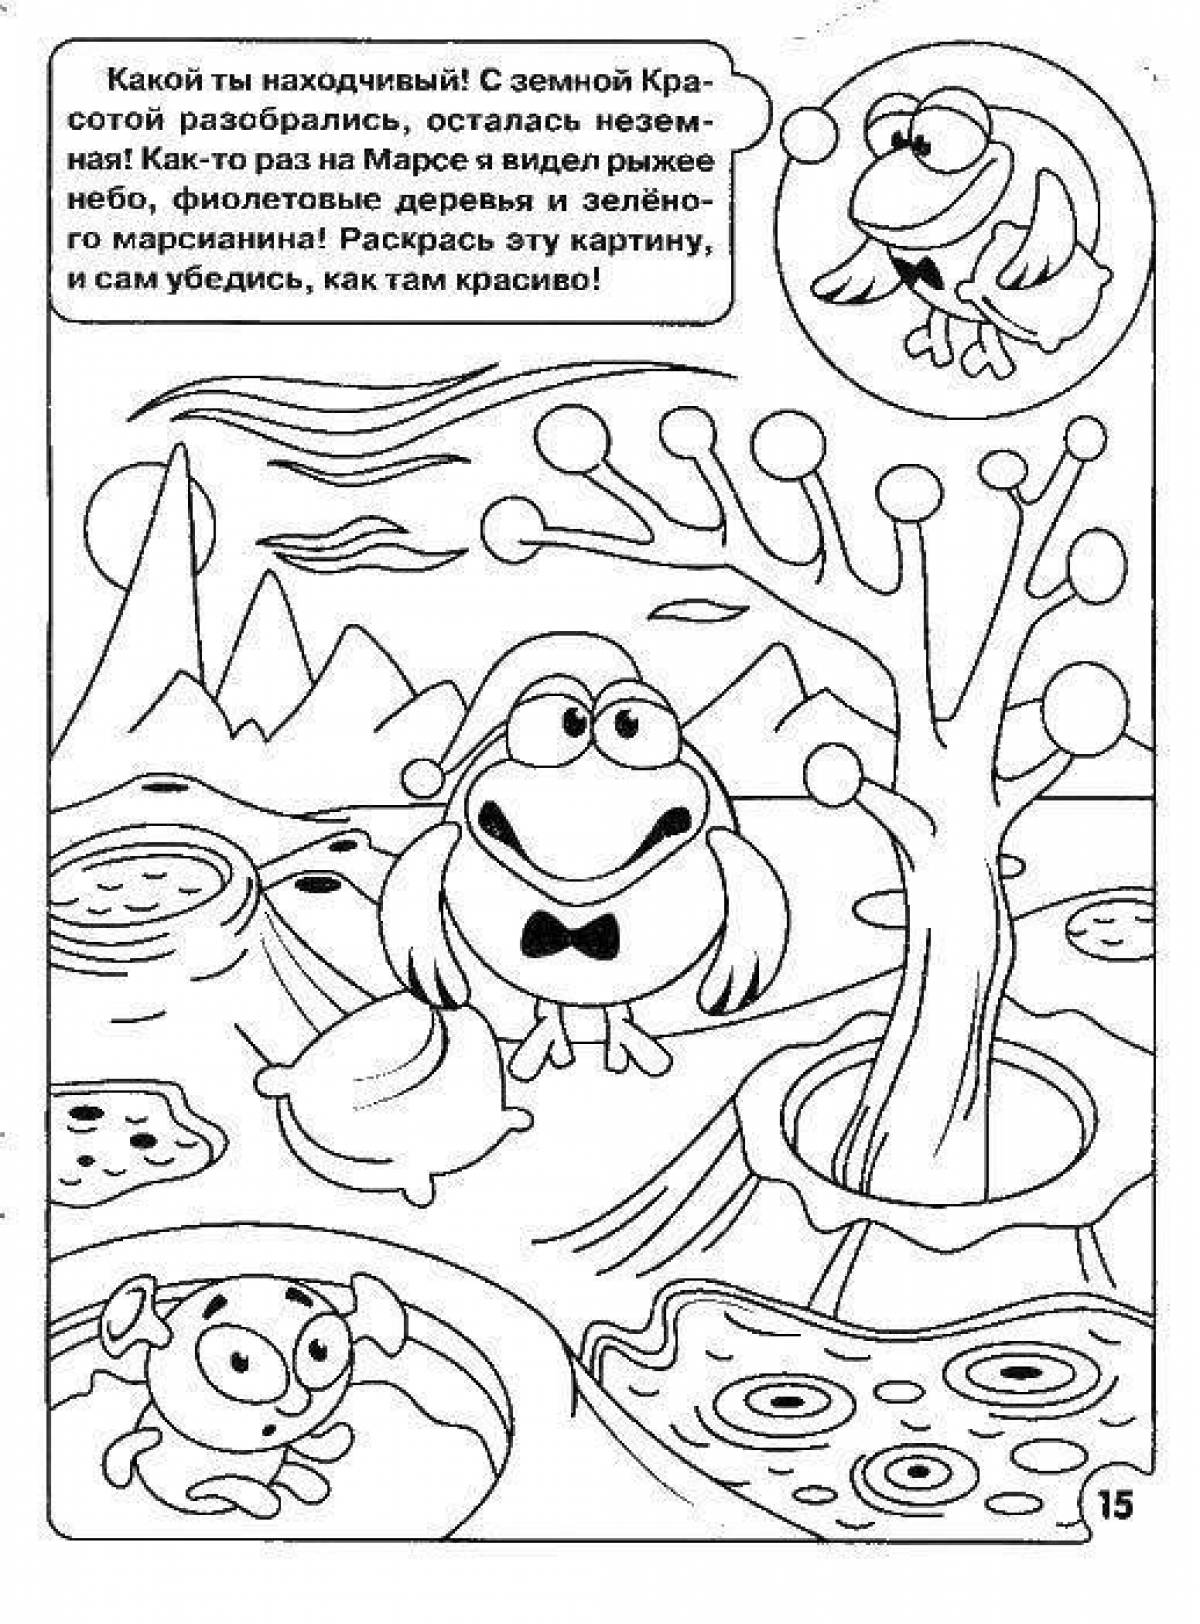 Coloring page gorgeous kar karych